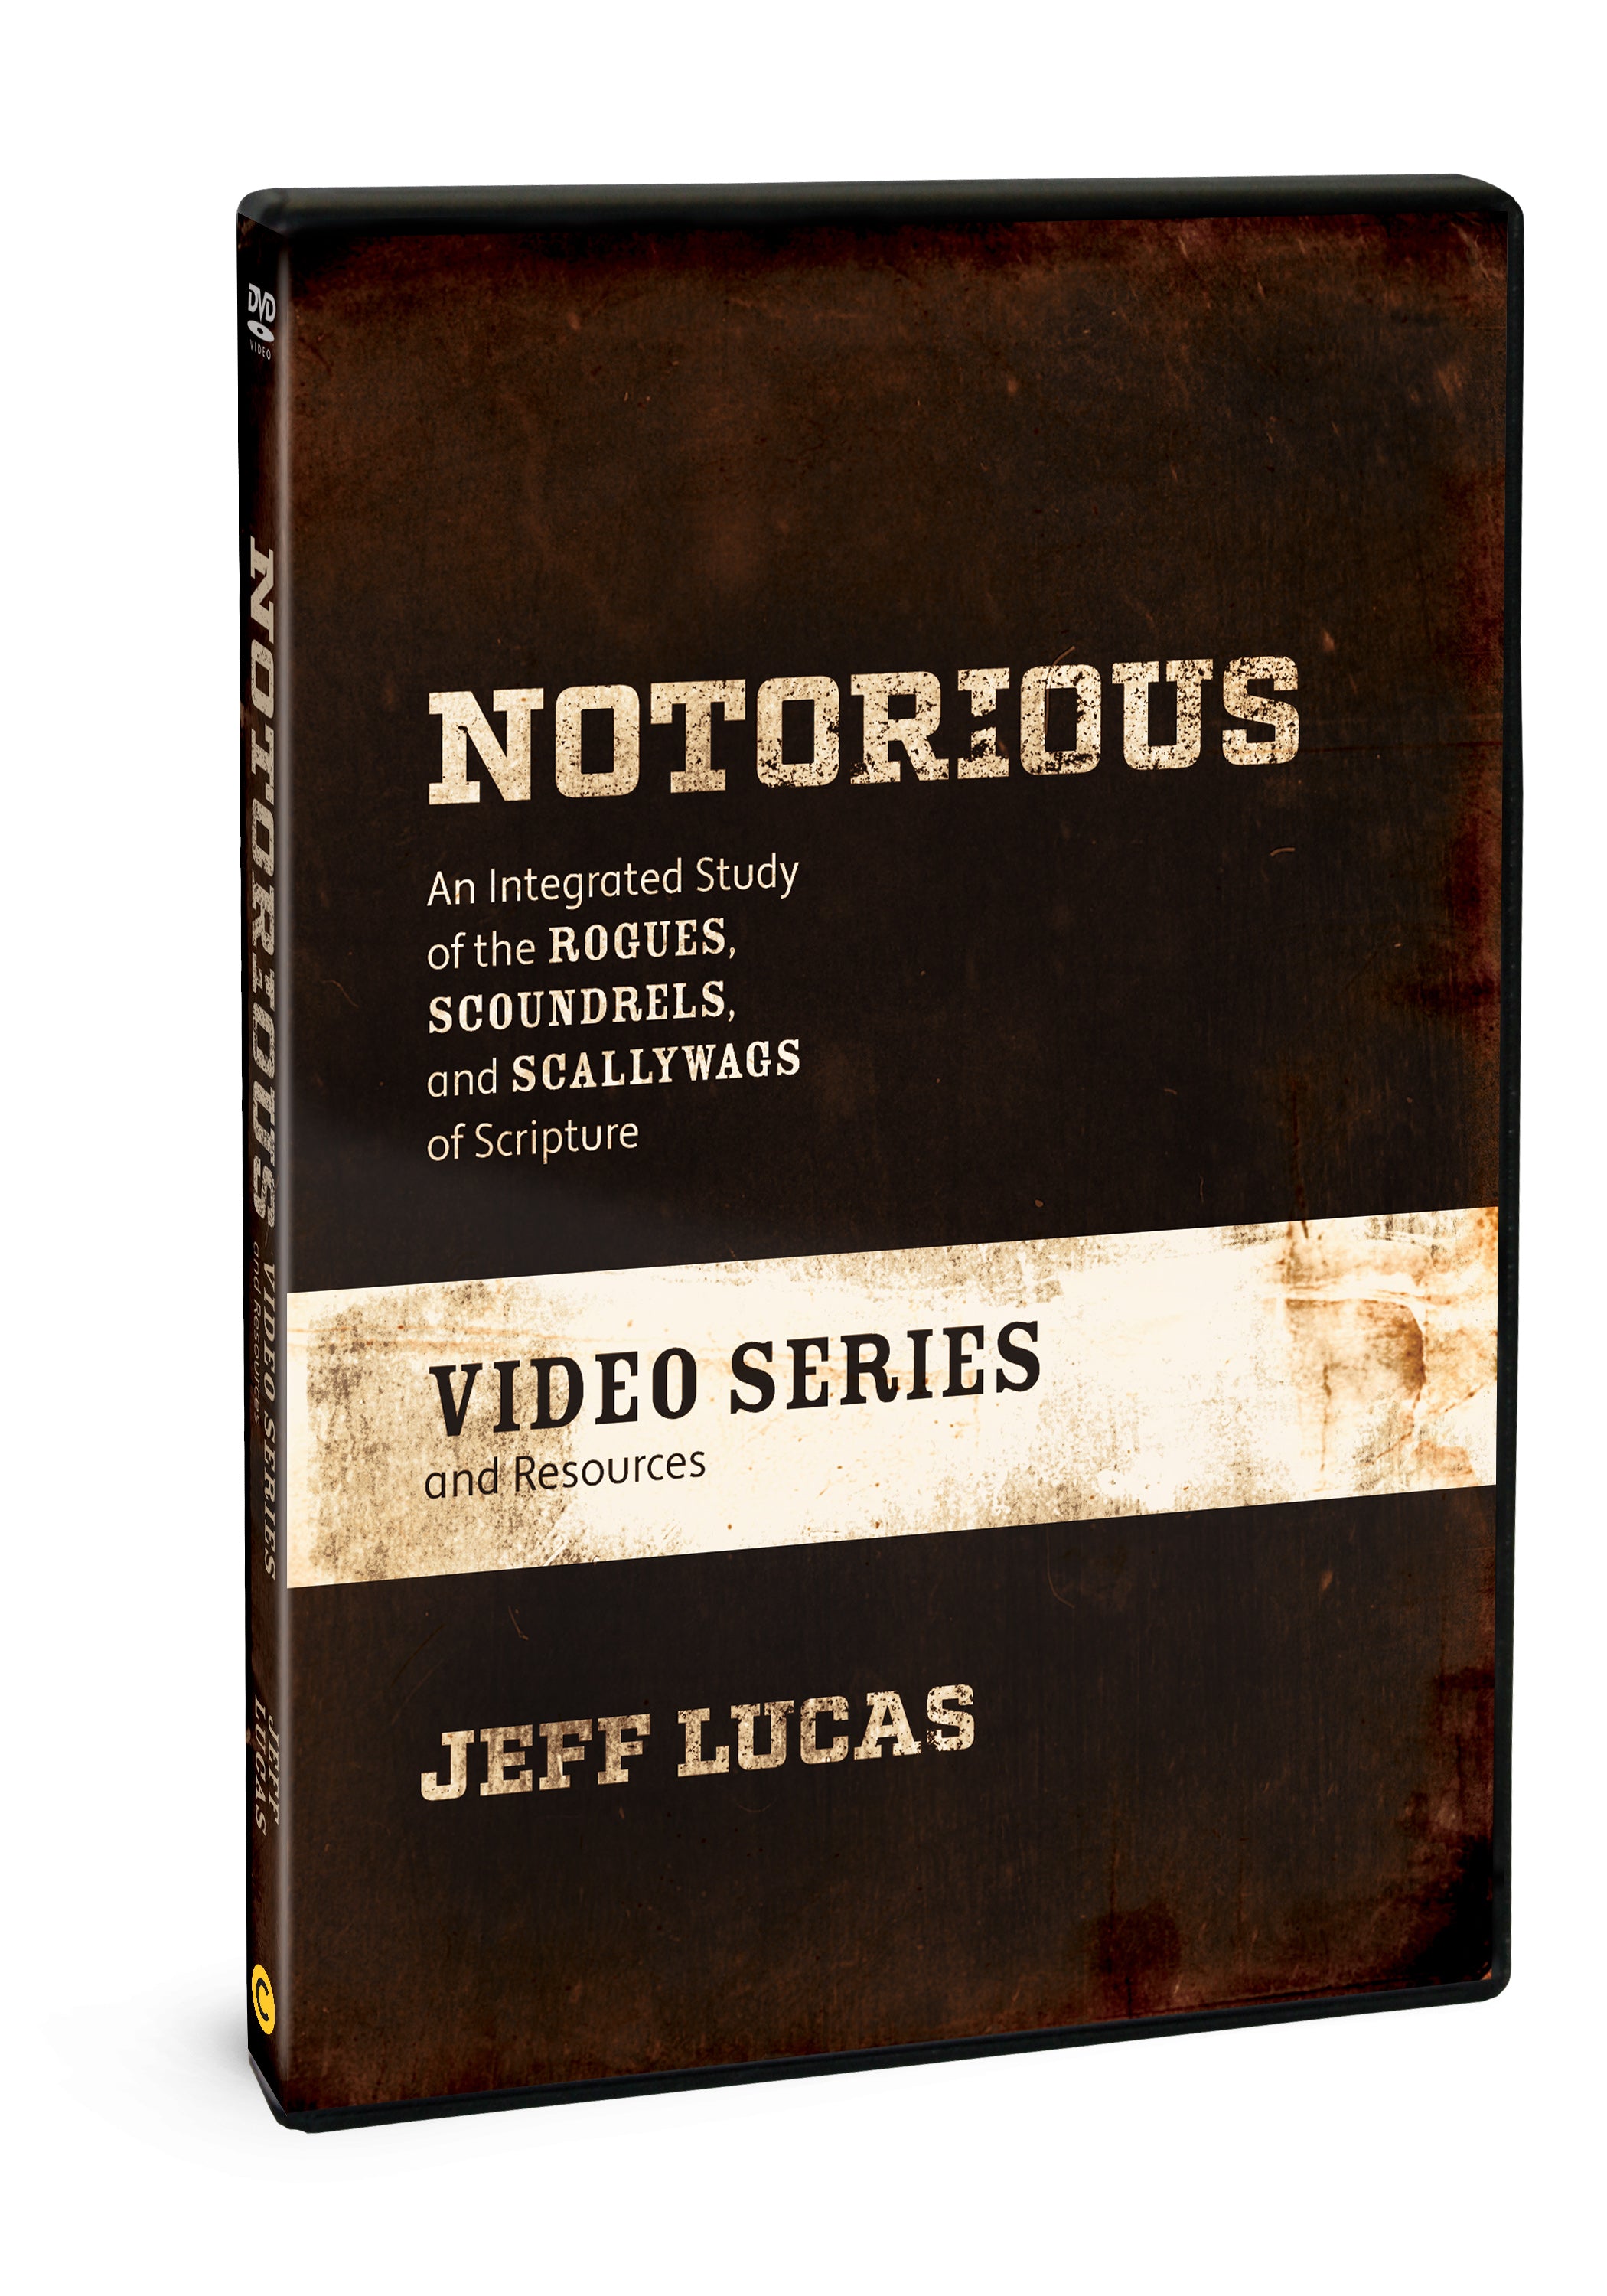 Image of Notorious DVD other